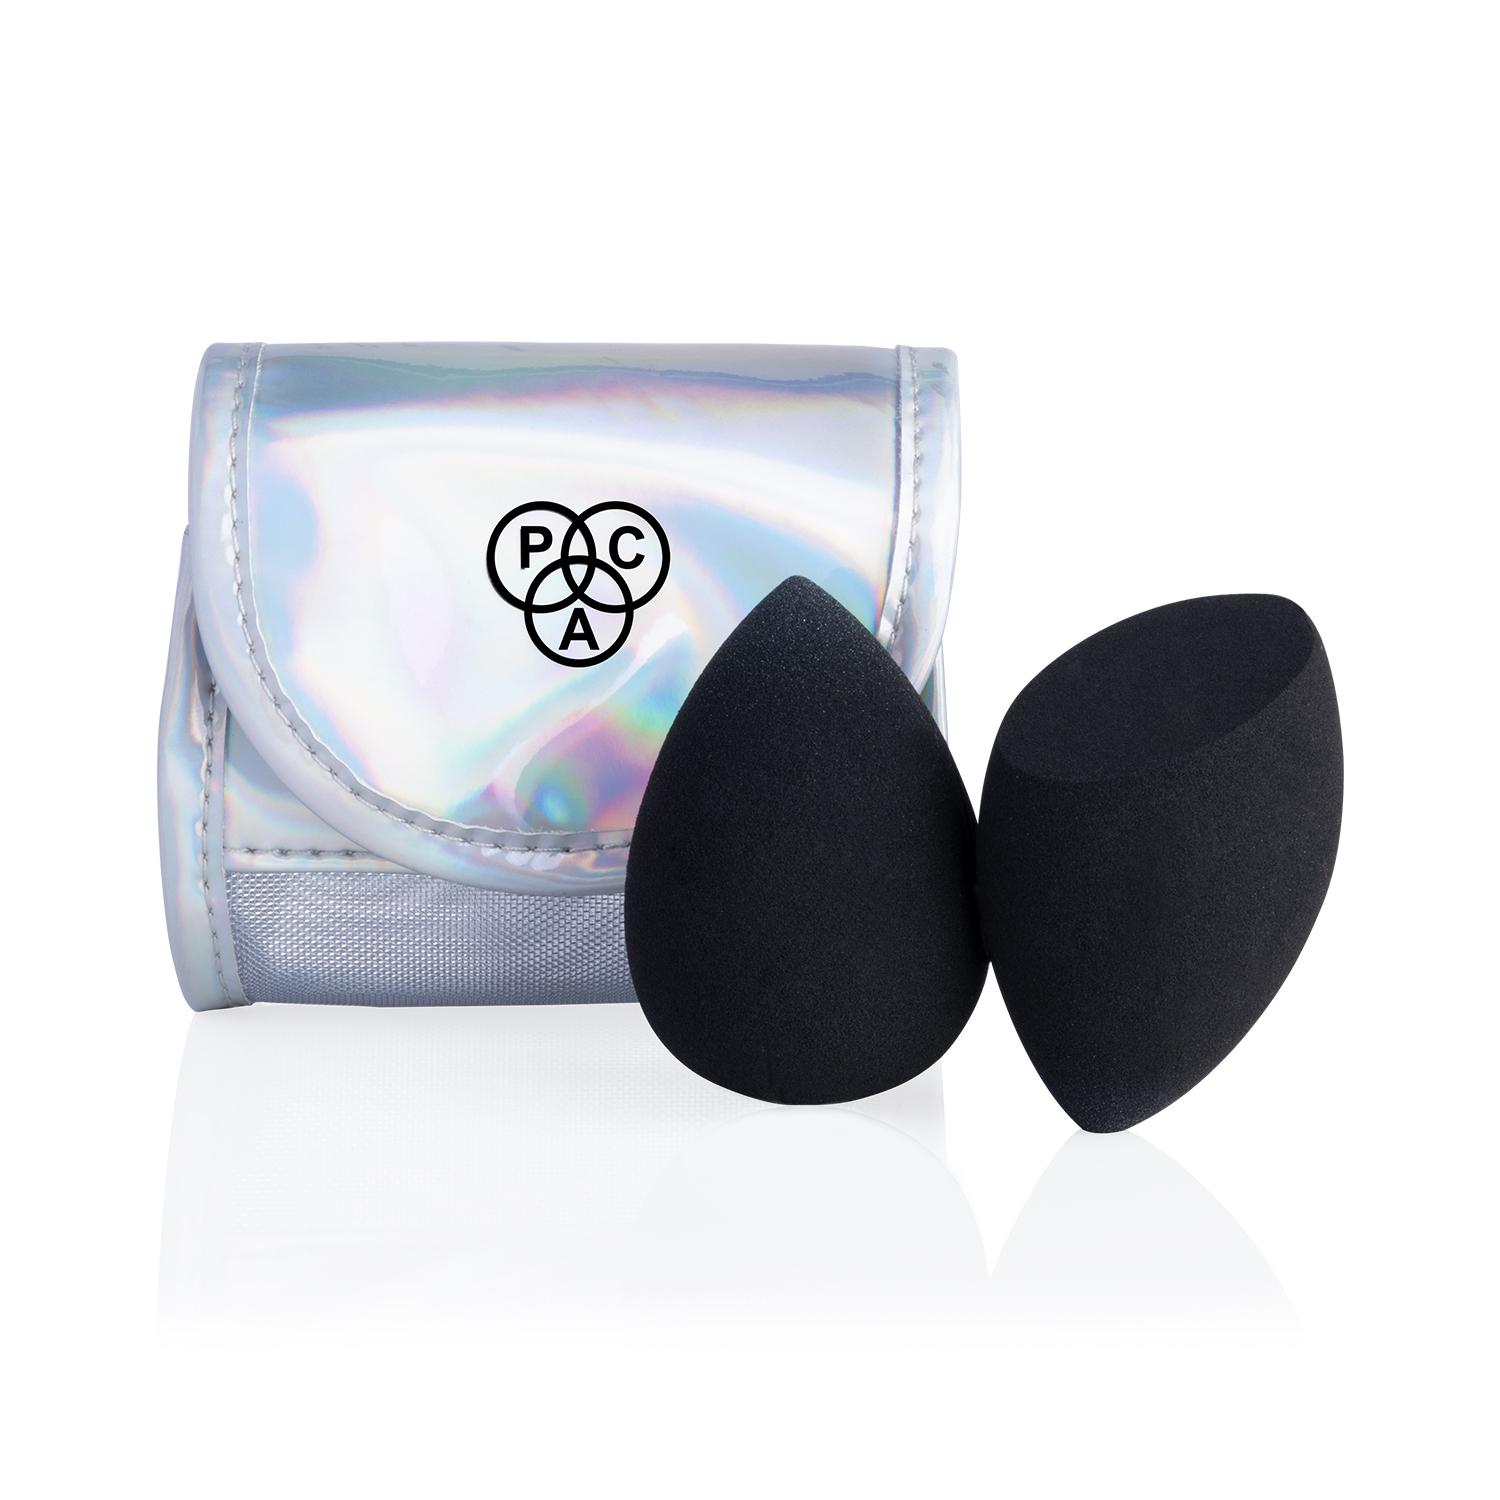 PAC Limited Edition Holographic Water Drop And Olive Cut 3D Sponge Set - (2Pcs)